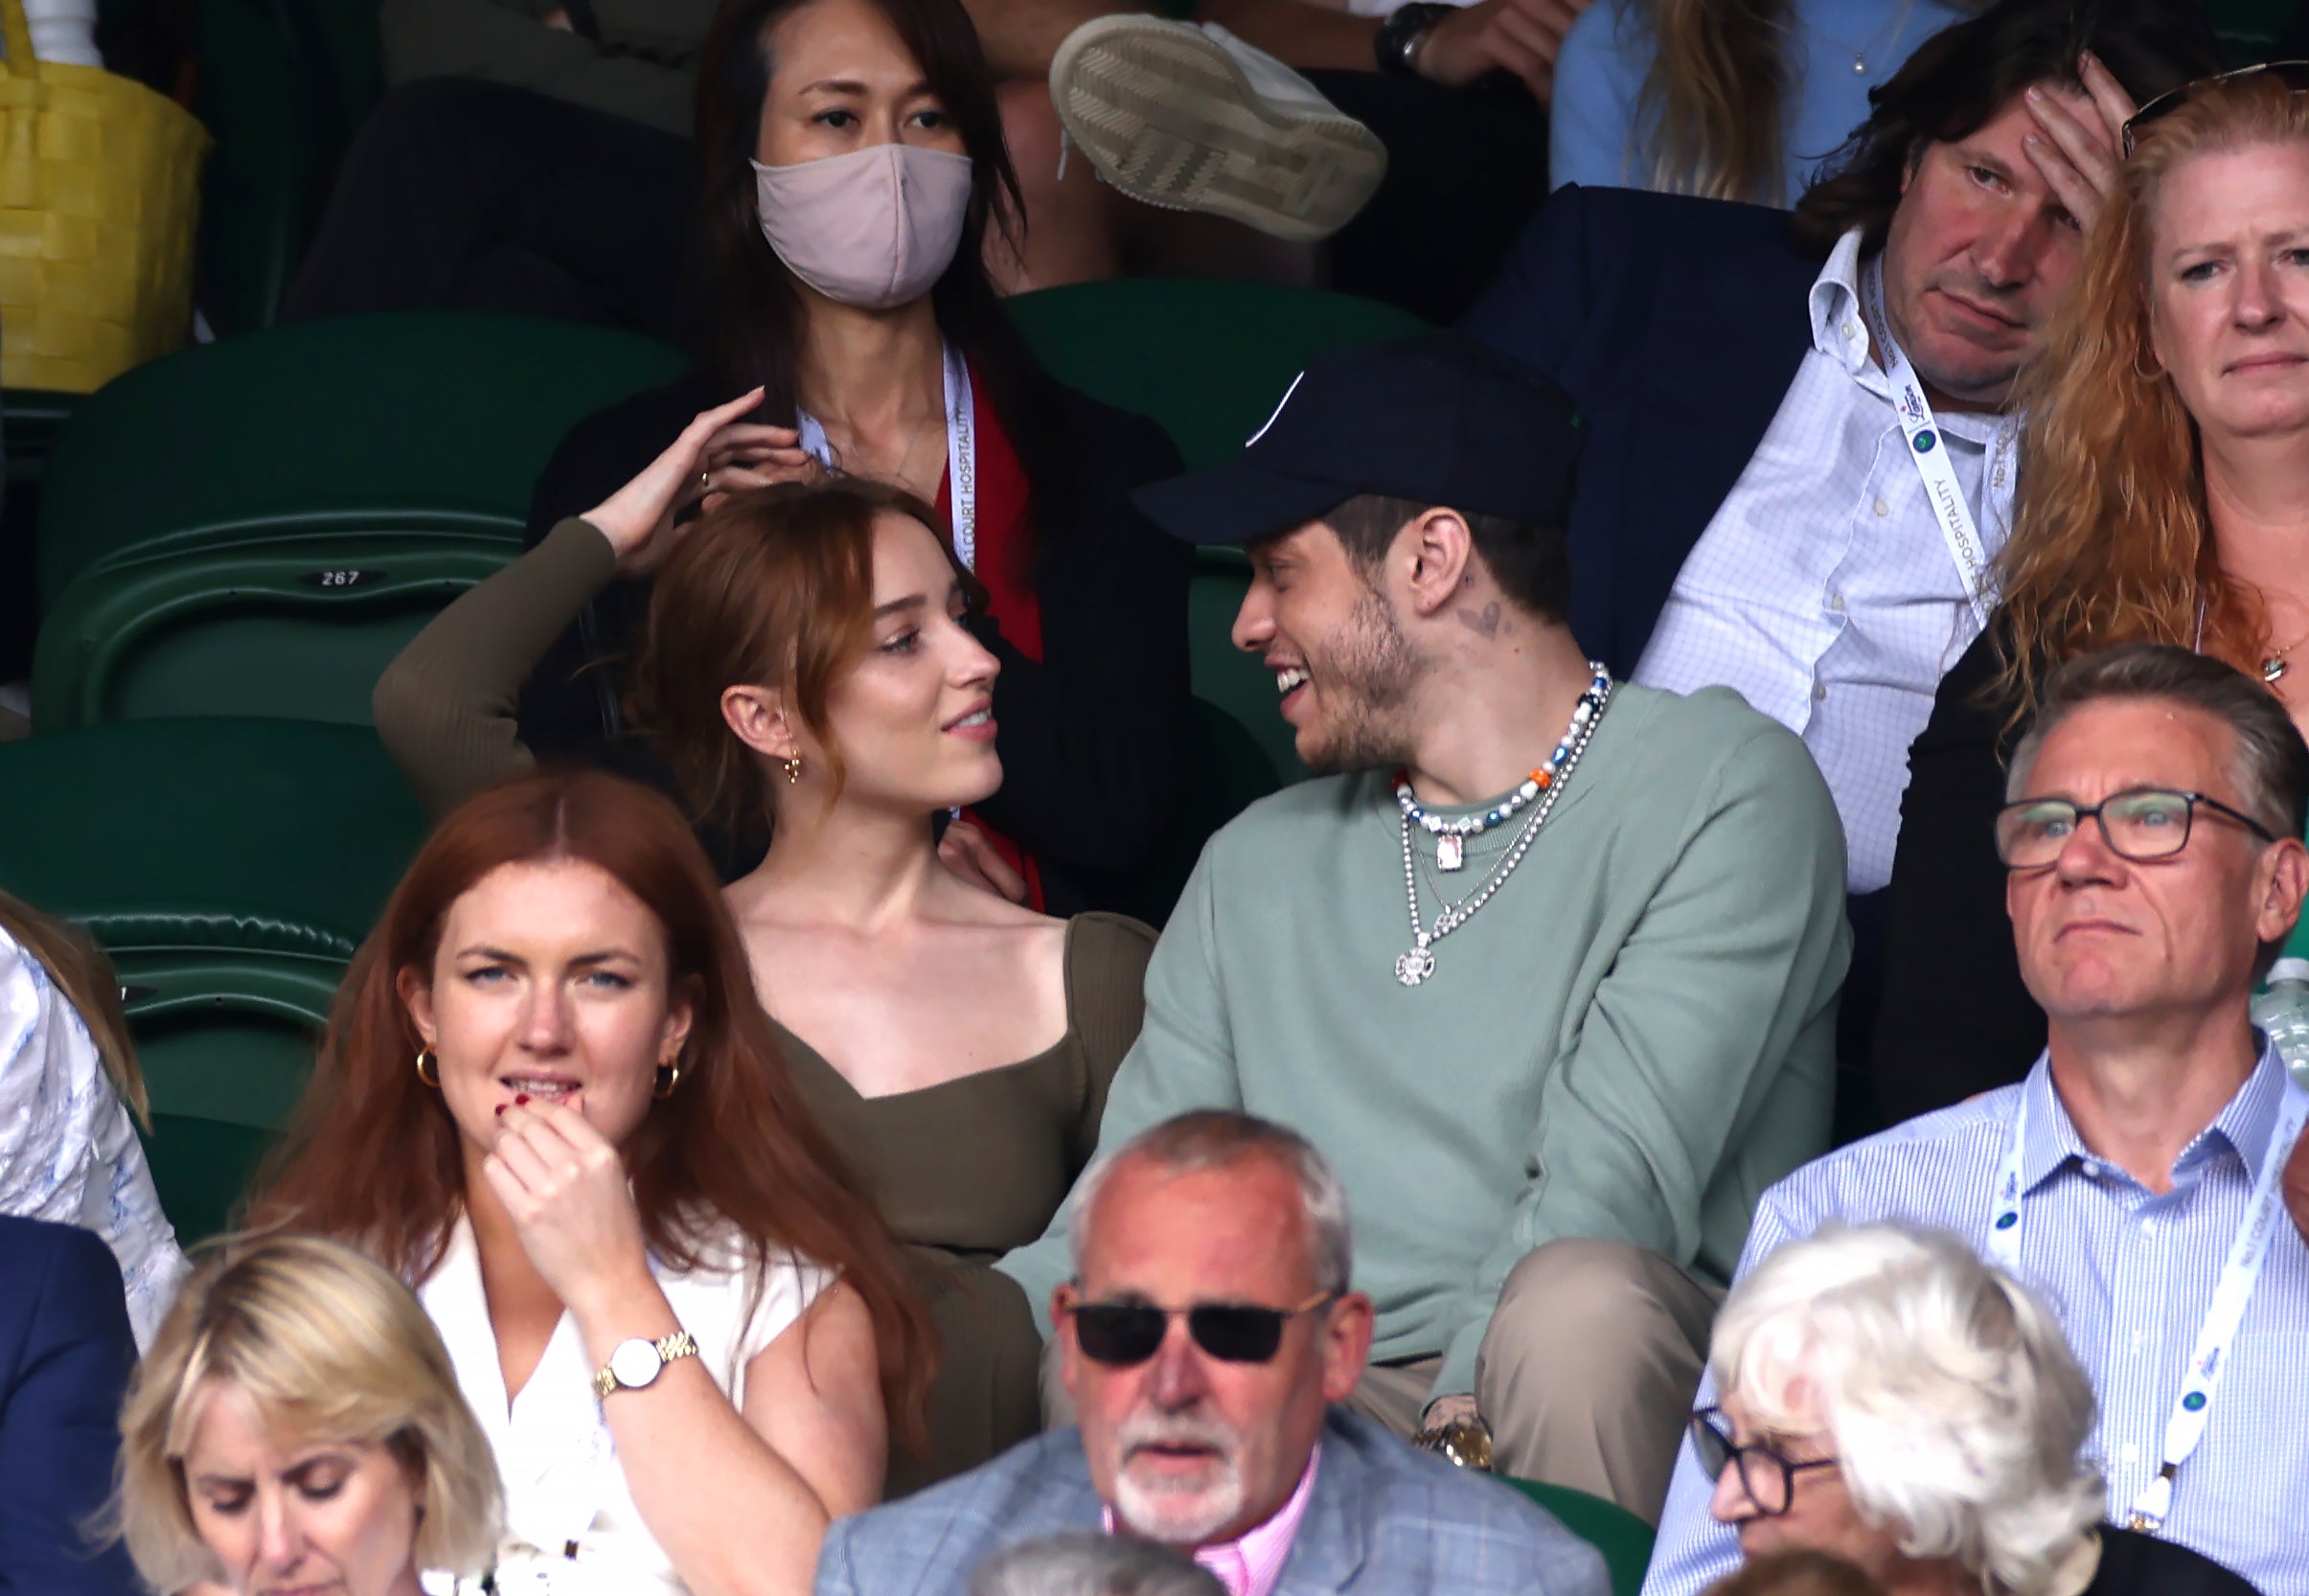 Phoebe Dynevor and Pete Davidson watch a match at centre court on day six of Wimbledon